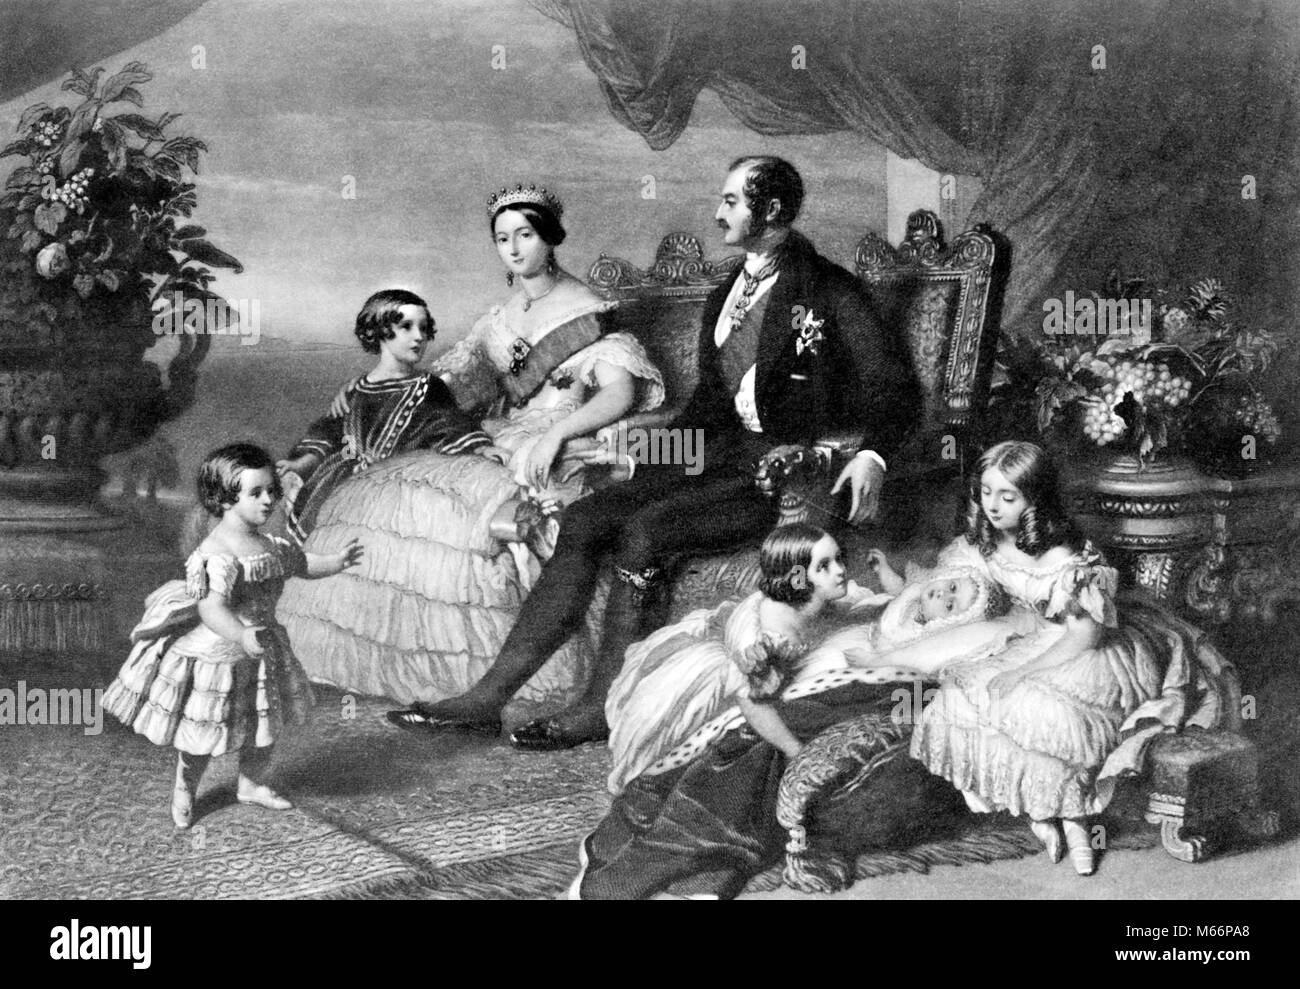 ROYAL FAMILY OF ENGLAND QUEEN VICTORIA PRINCE ALBERT 5 CHILDREN BY WINTERHALTER GROUP PORTRAIT - q65010 CPC001 HARS SONS JOY LIFESTYLE FIVE HISTORY FEMALES MARRIED 5 BROTHERS SPOUSE HUSBANDS HOME LIFE COPY SPACE FRIENDSHIP LADIES DAUGHTERS COUPLES INDOORS SIBLINGS ENGRAVING SISTERS ENGLISH FAMILIES NOSTALGIA TOGETHERNESS HISTORIC WIVES HAPPINESS PERSONALITY FAMOUS LEADERSHIP PRIDE AUTHORITY POLITICS SIBLING MONARCH CONNECTION ROYAL 19TH CENTURY GROUP OF PEOPLE ROYALTY VICTORIA JUVENILES MALES PRINCE PRINCE ALBERT QUEEN VICTORIA REGAL ROYAL FAMILY WINTERHALTER 1846 ALBERT B&W BLACK AND WHITE Stock Photo